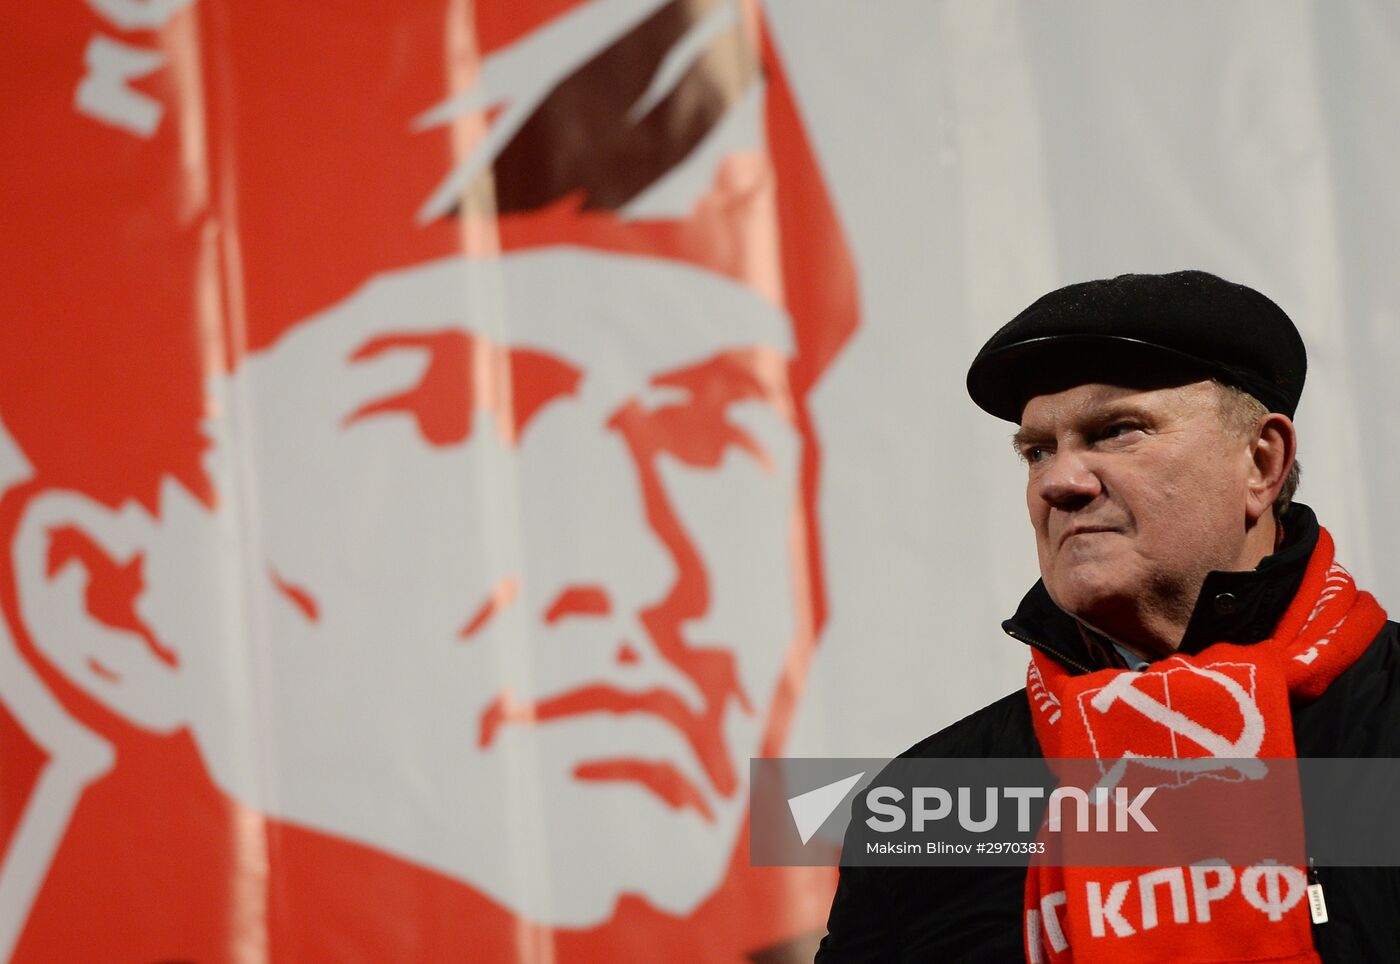 Processions marking 99th anniversary of October Revolution in Moscow